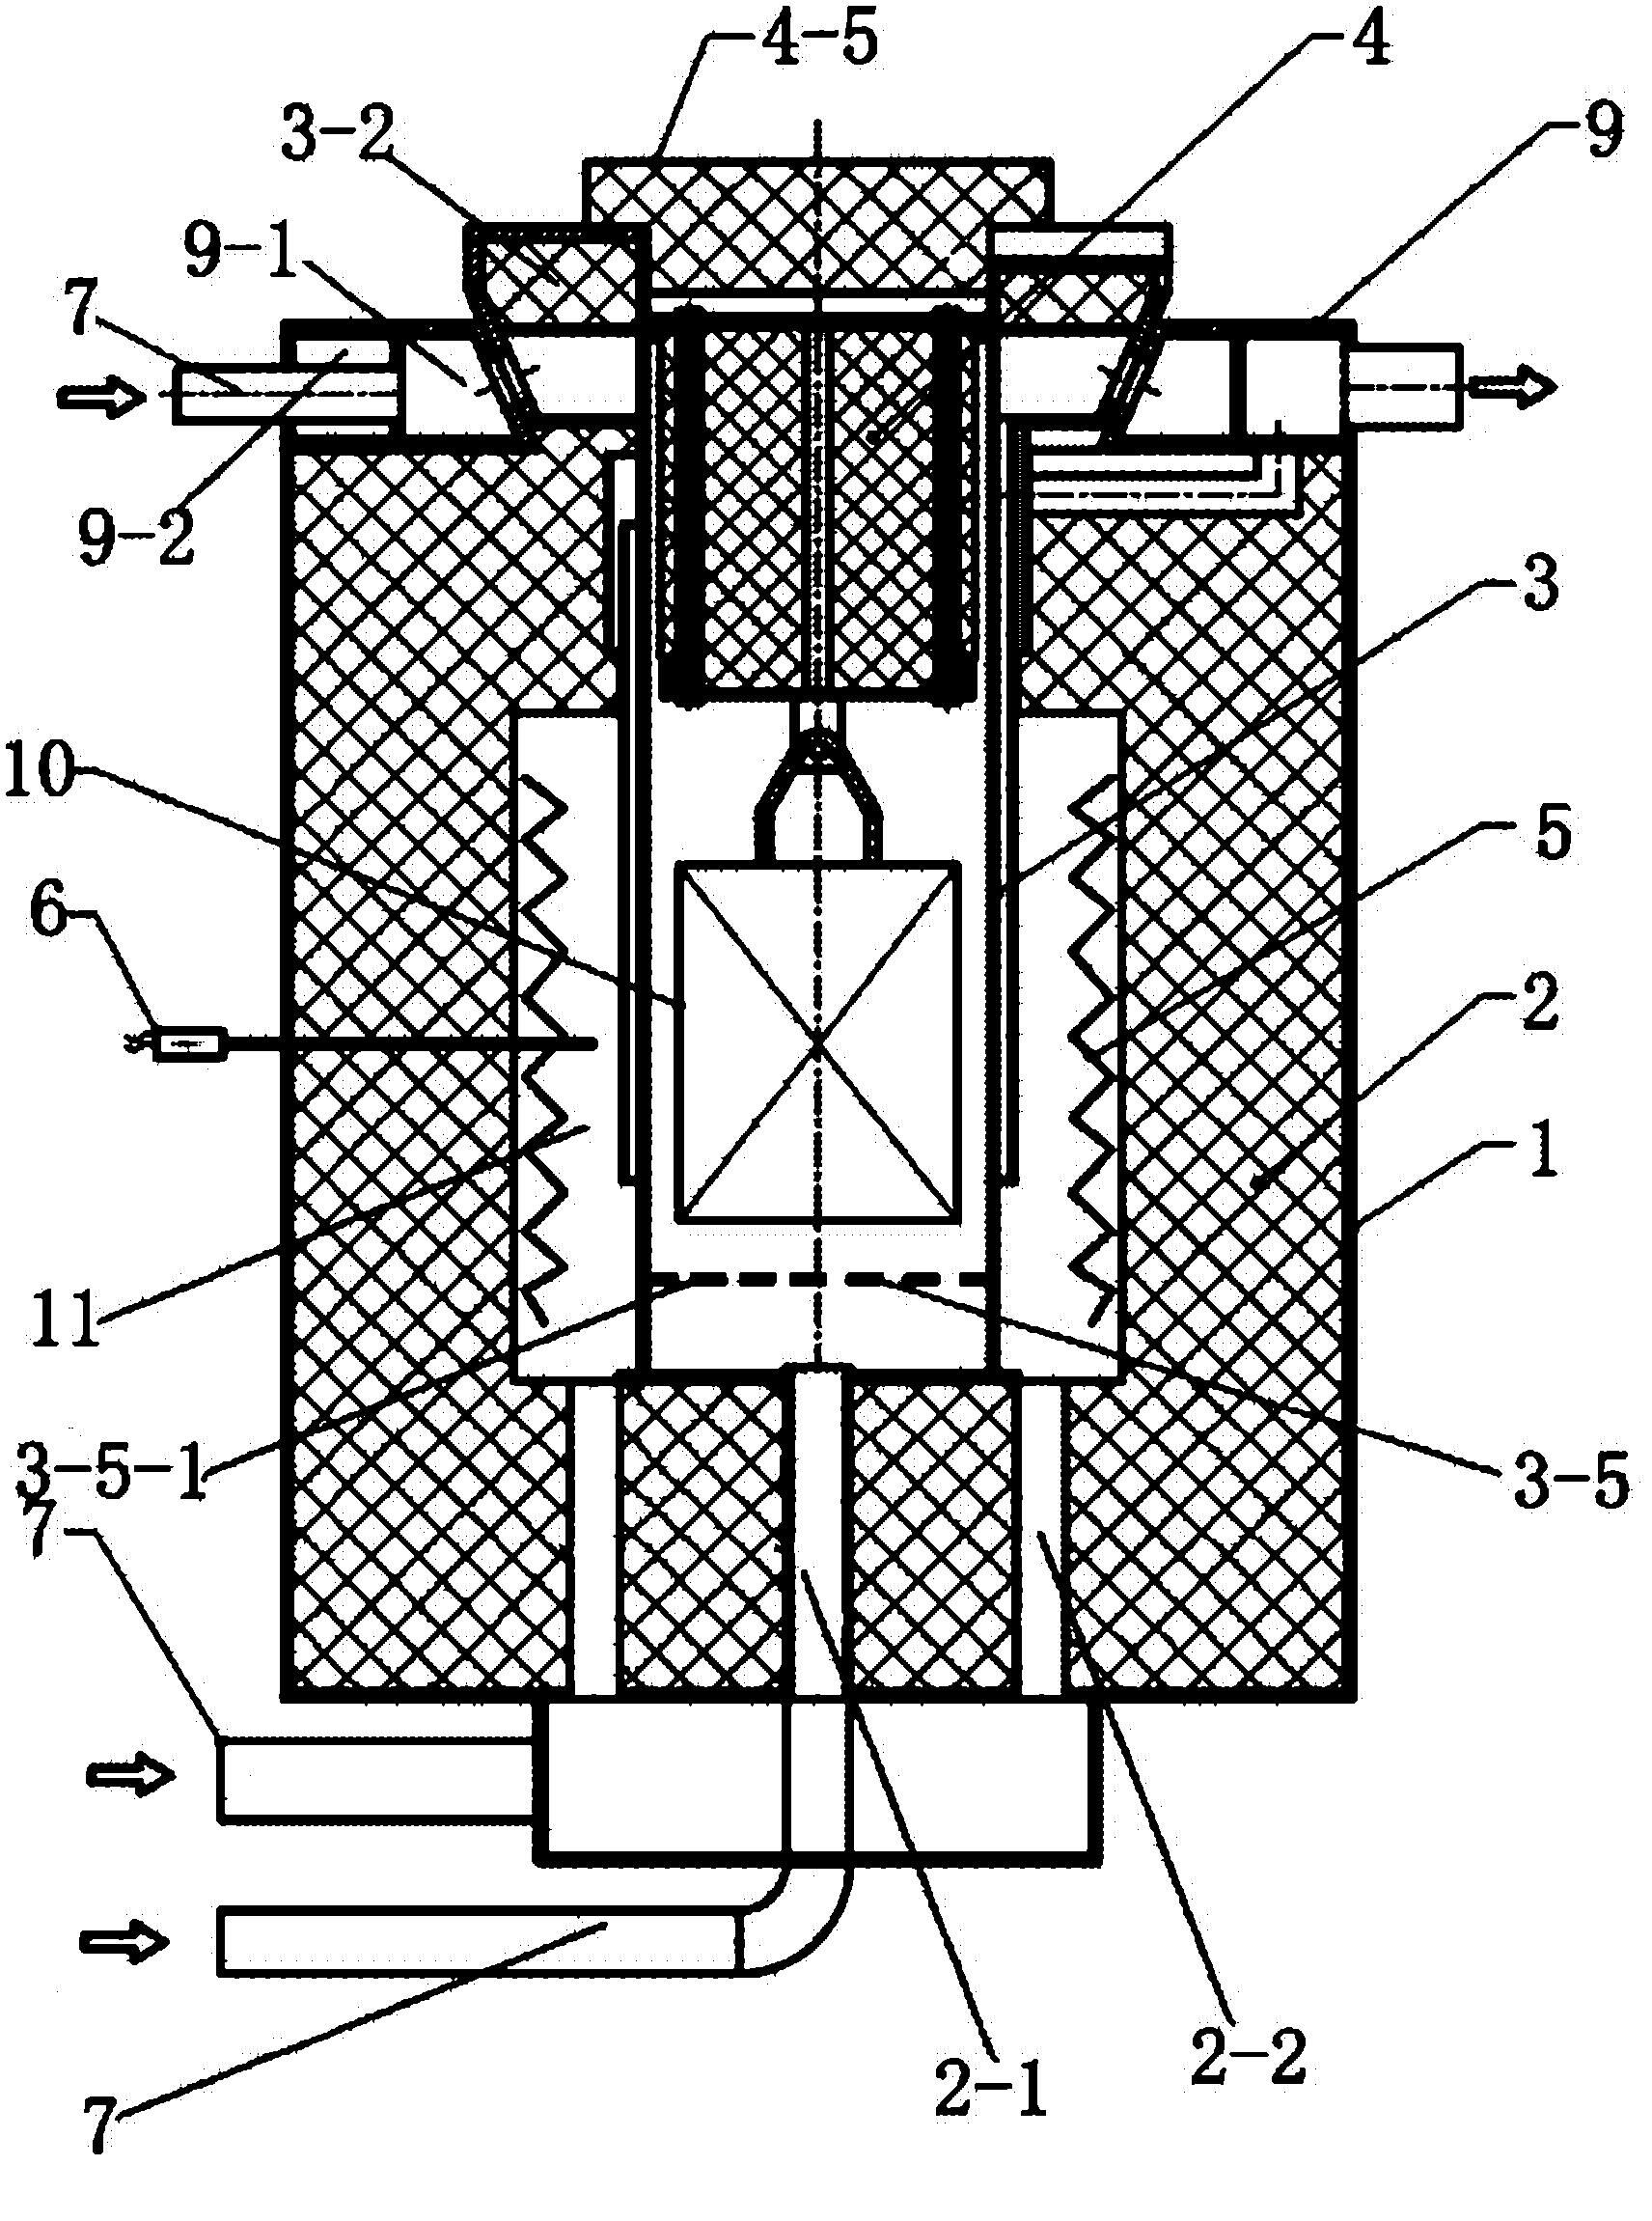 Thermal simulation furnace with heating/cooling controllable structure and capable of sampling halfway